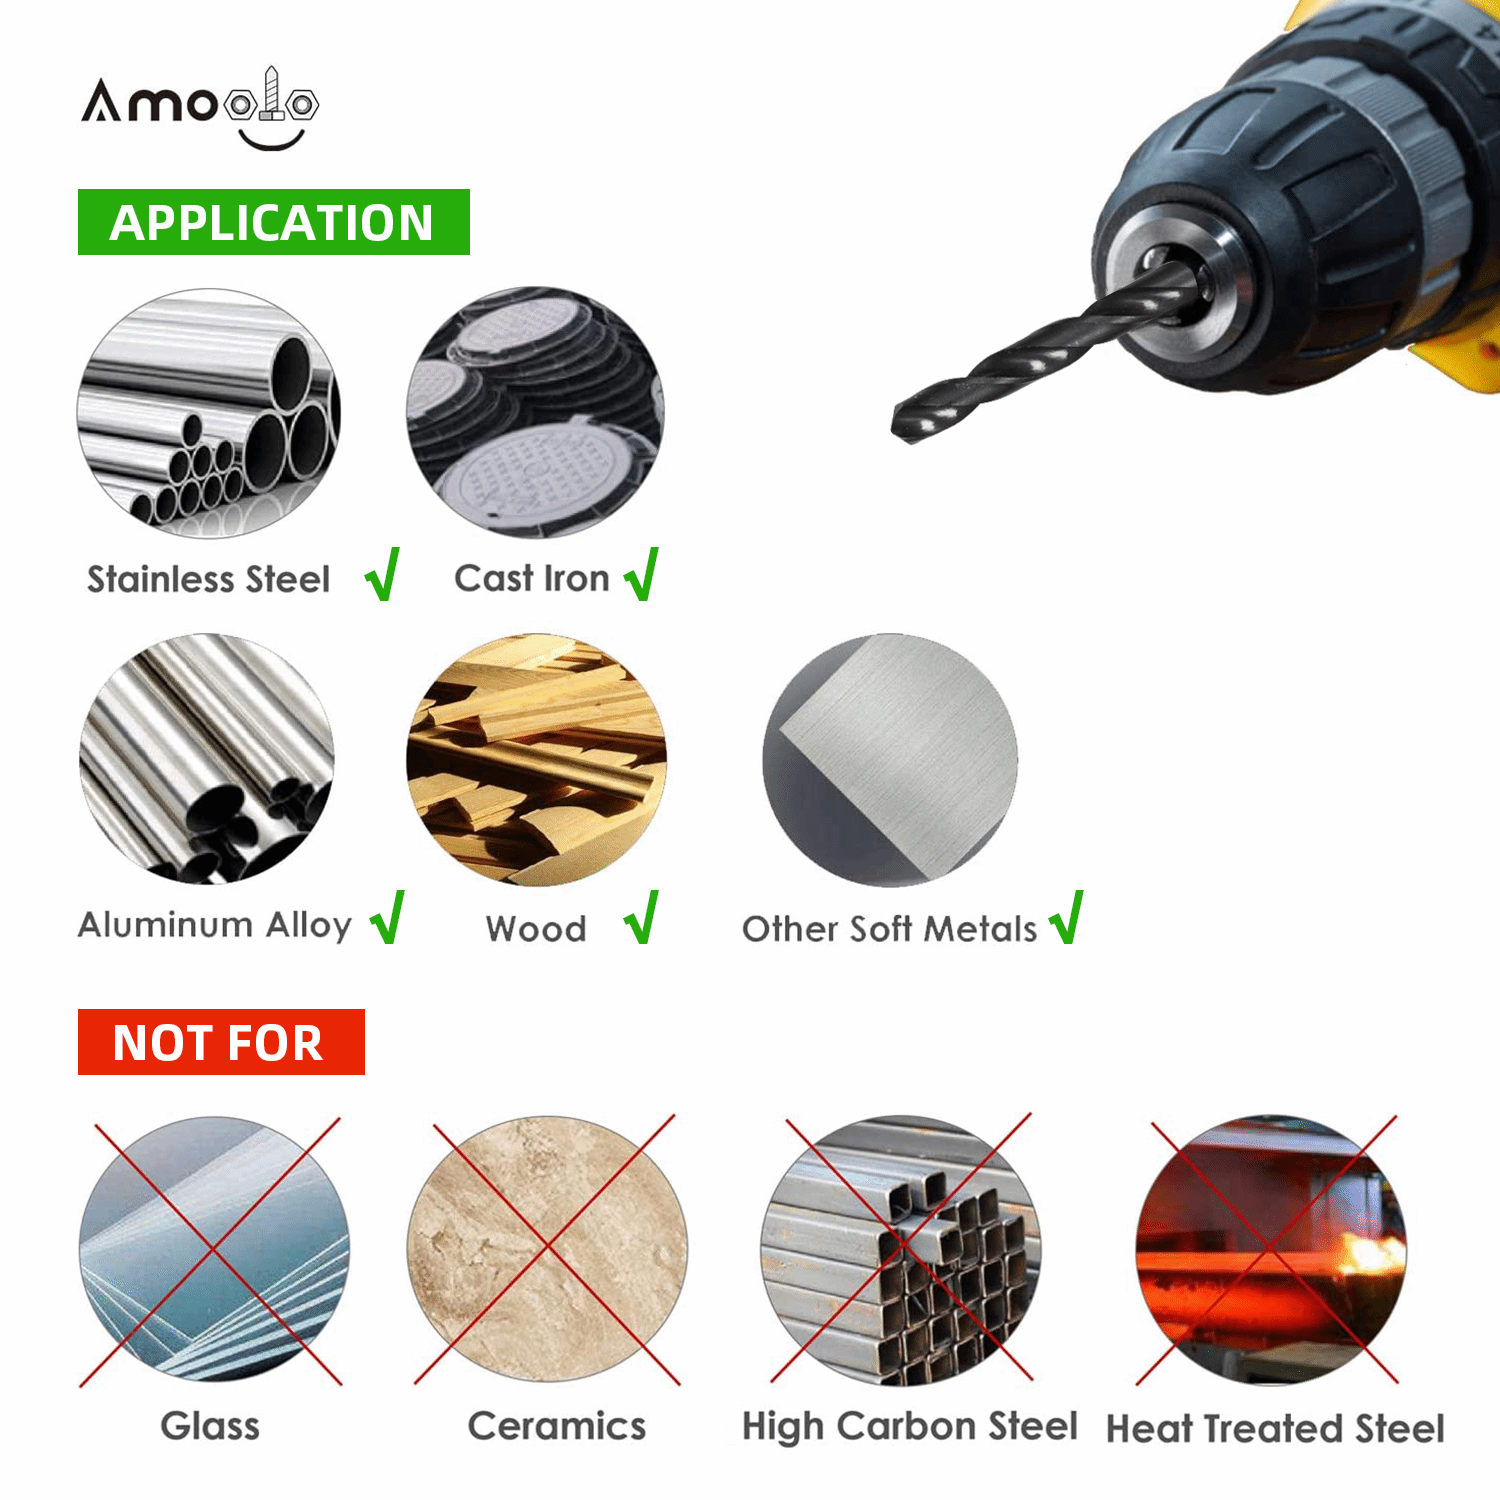 amoolo High Speed Steel Twist Drill Bit Set, Water Resistant, Suitable for Steels, Cast Iron